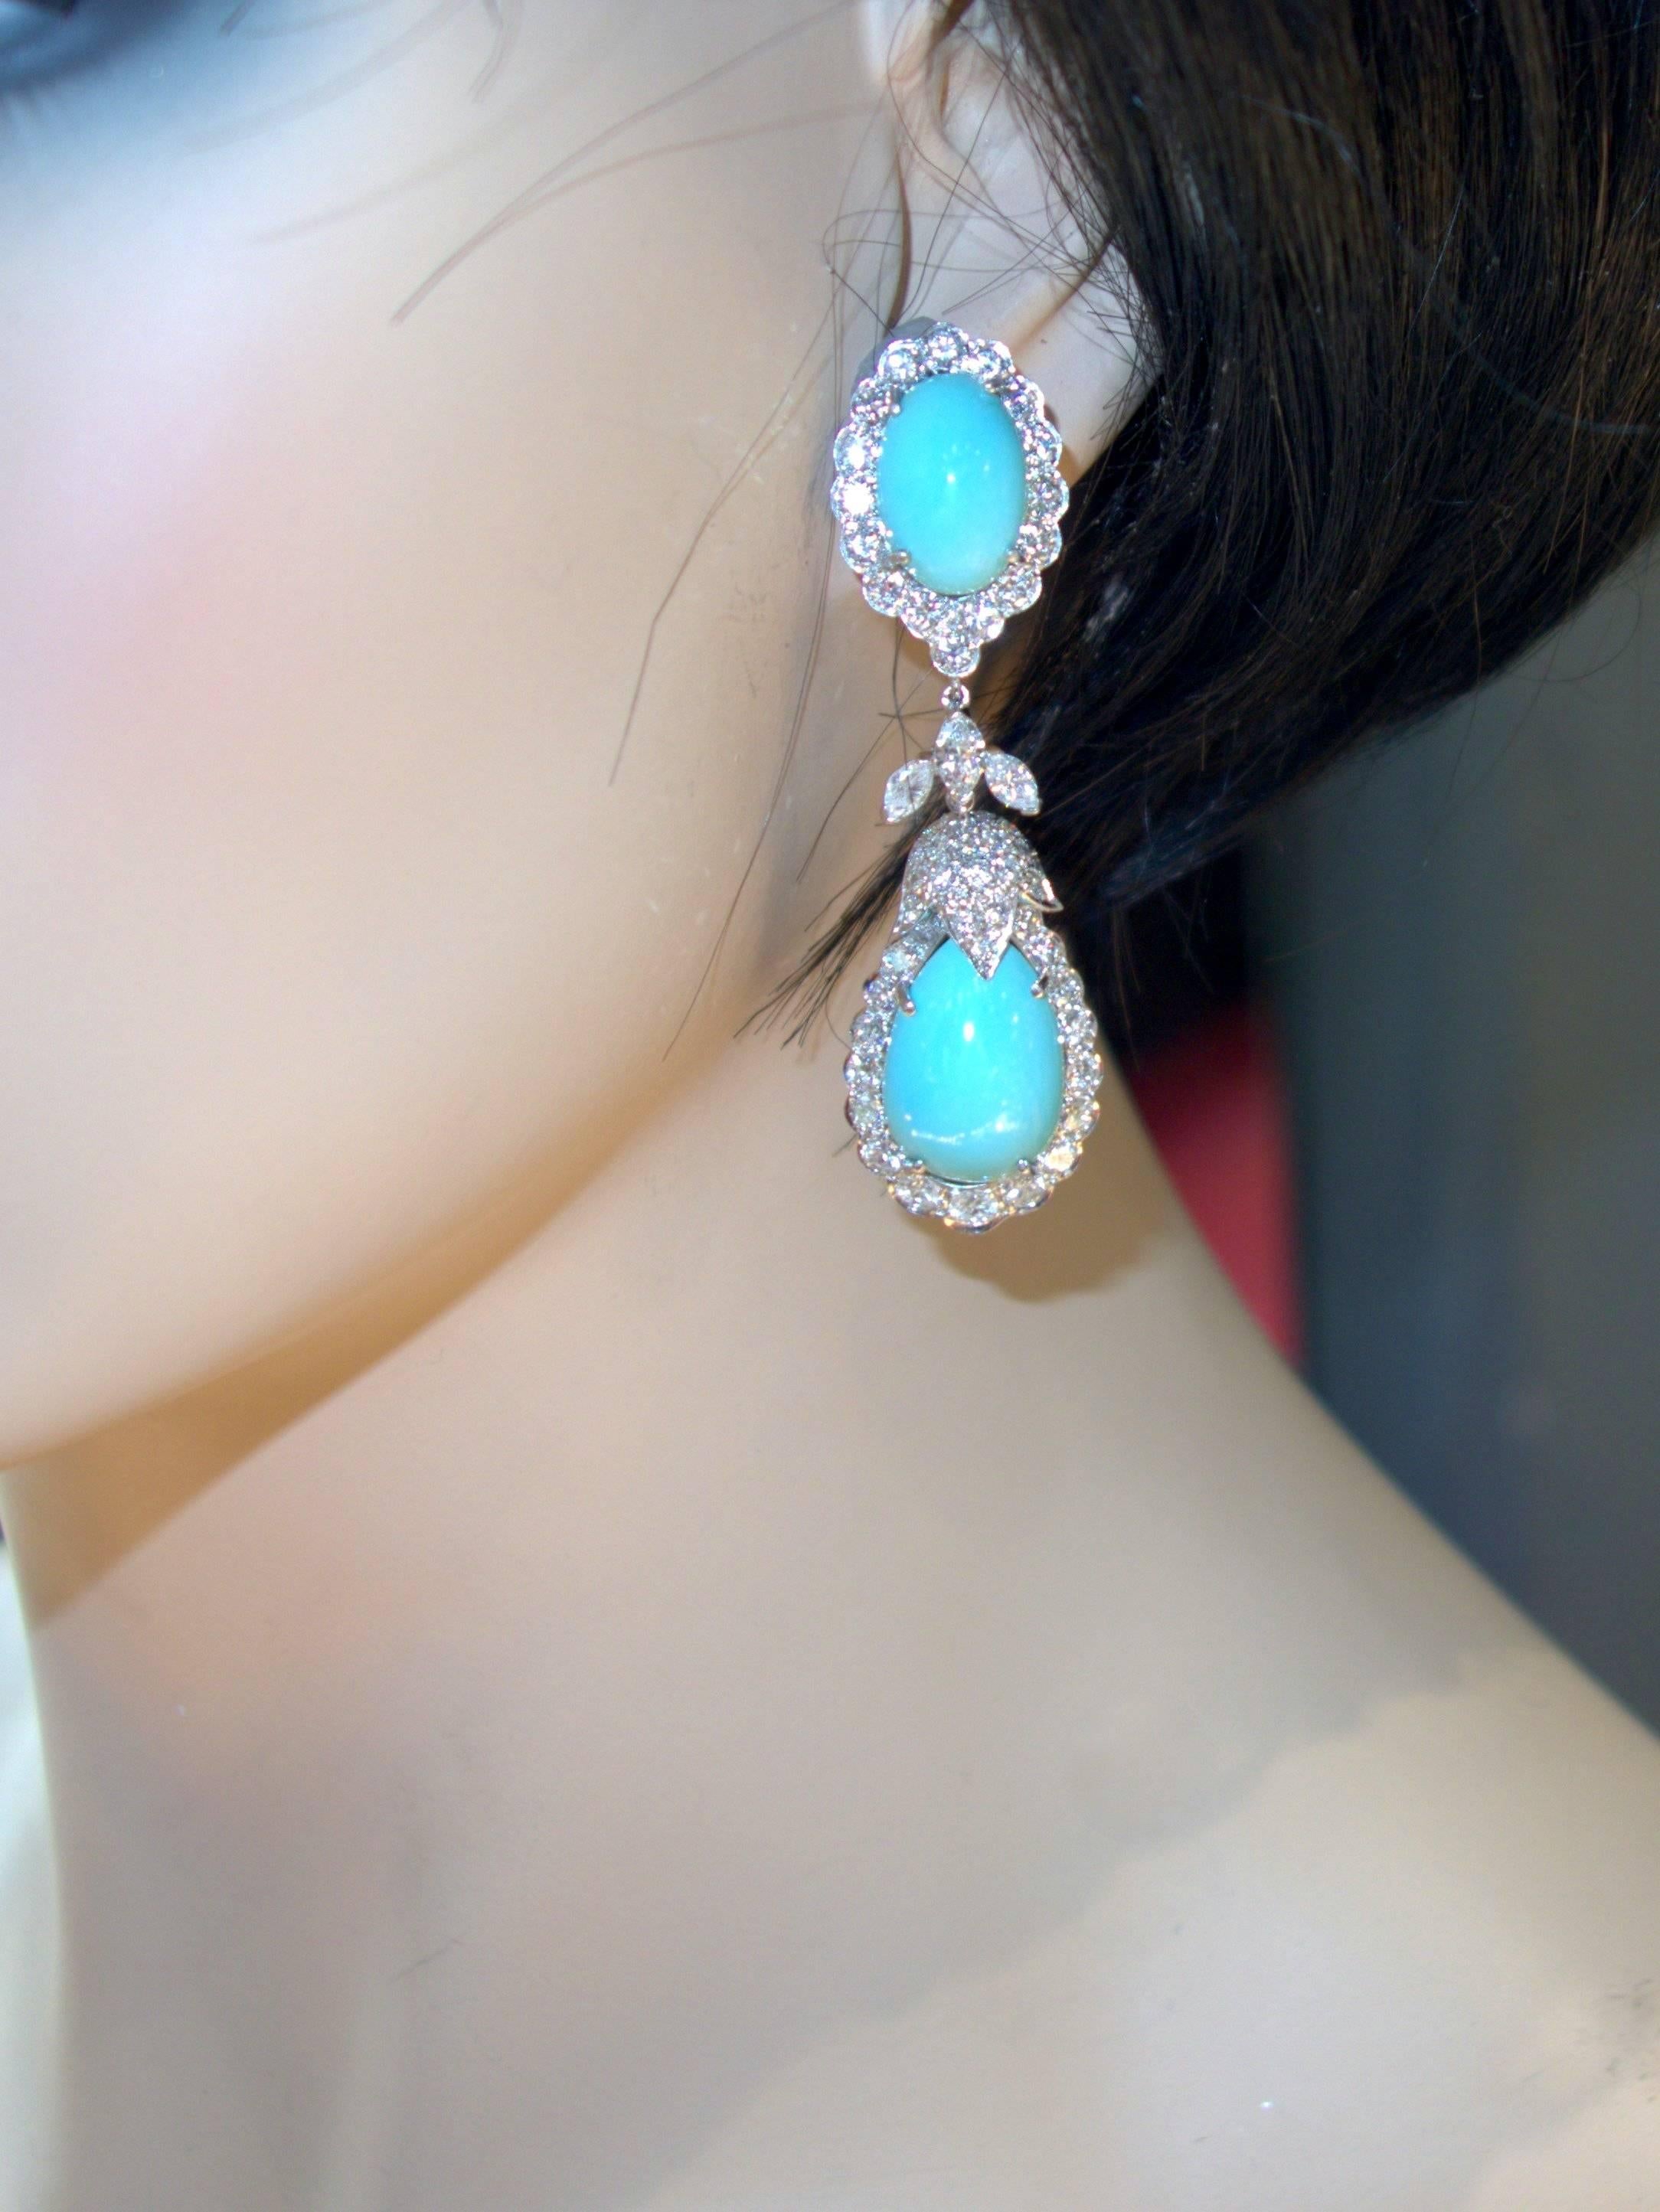 About 2.75 inches long with 108 fine white diamonds, both round and marquise cut, weighing approximately 7.3 cts., and centering bright robin's egg blue natural turquoise, these earrings are a bright statement for the ear.  Circa1960